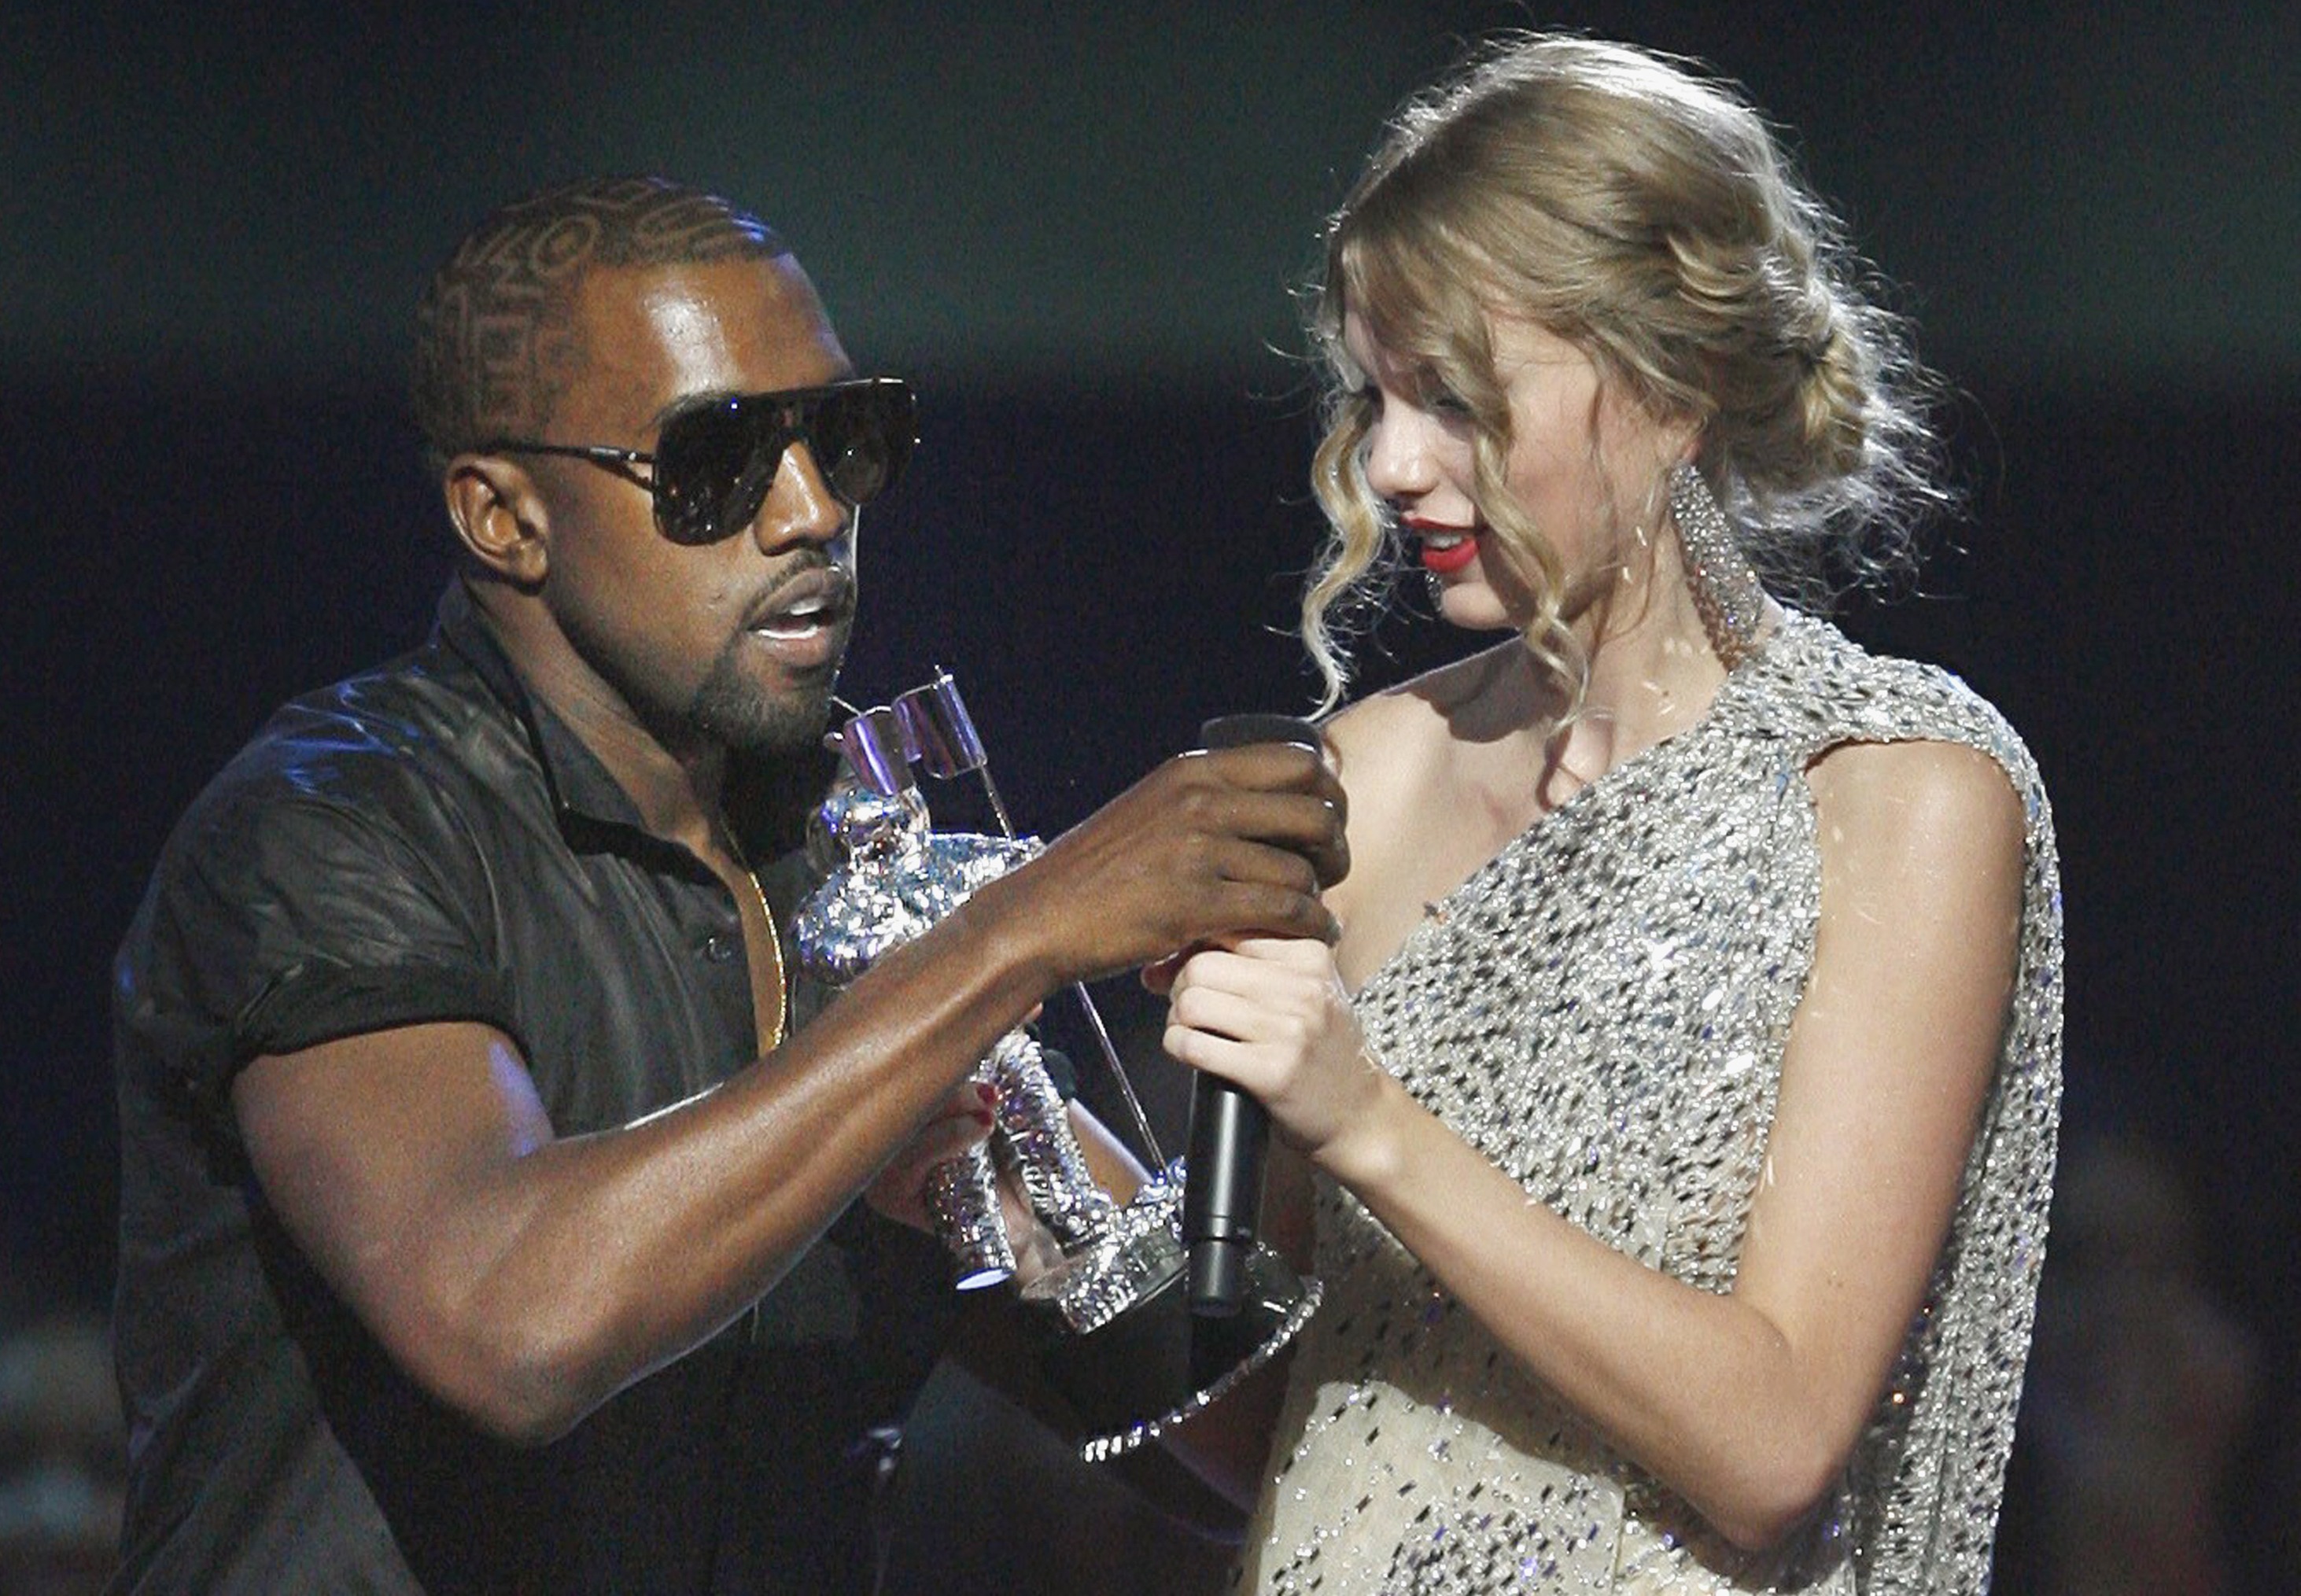 Wallpaper - Kanye West And Taylor Swift Mtv , HD Wallpaper & Backgrounds